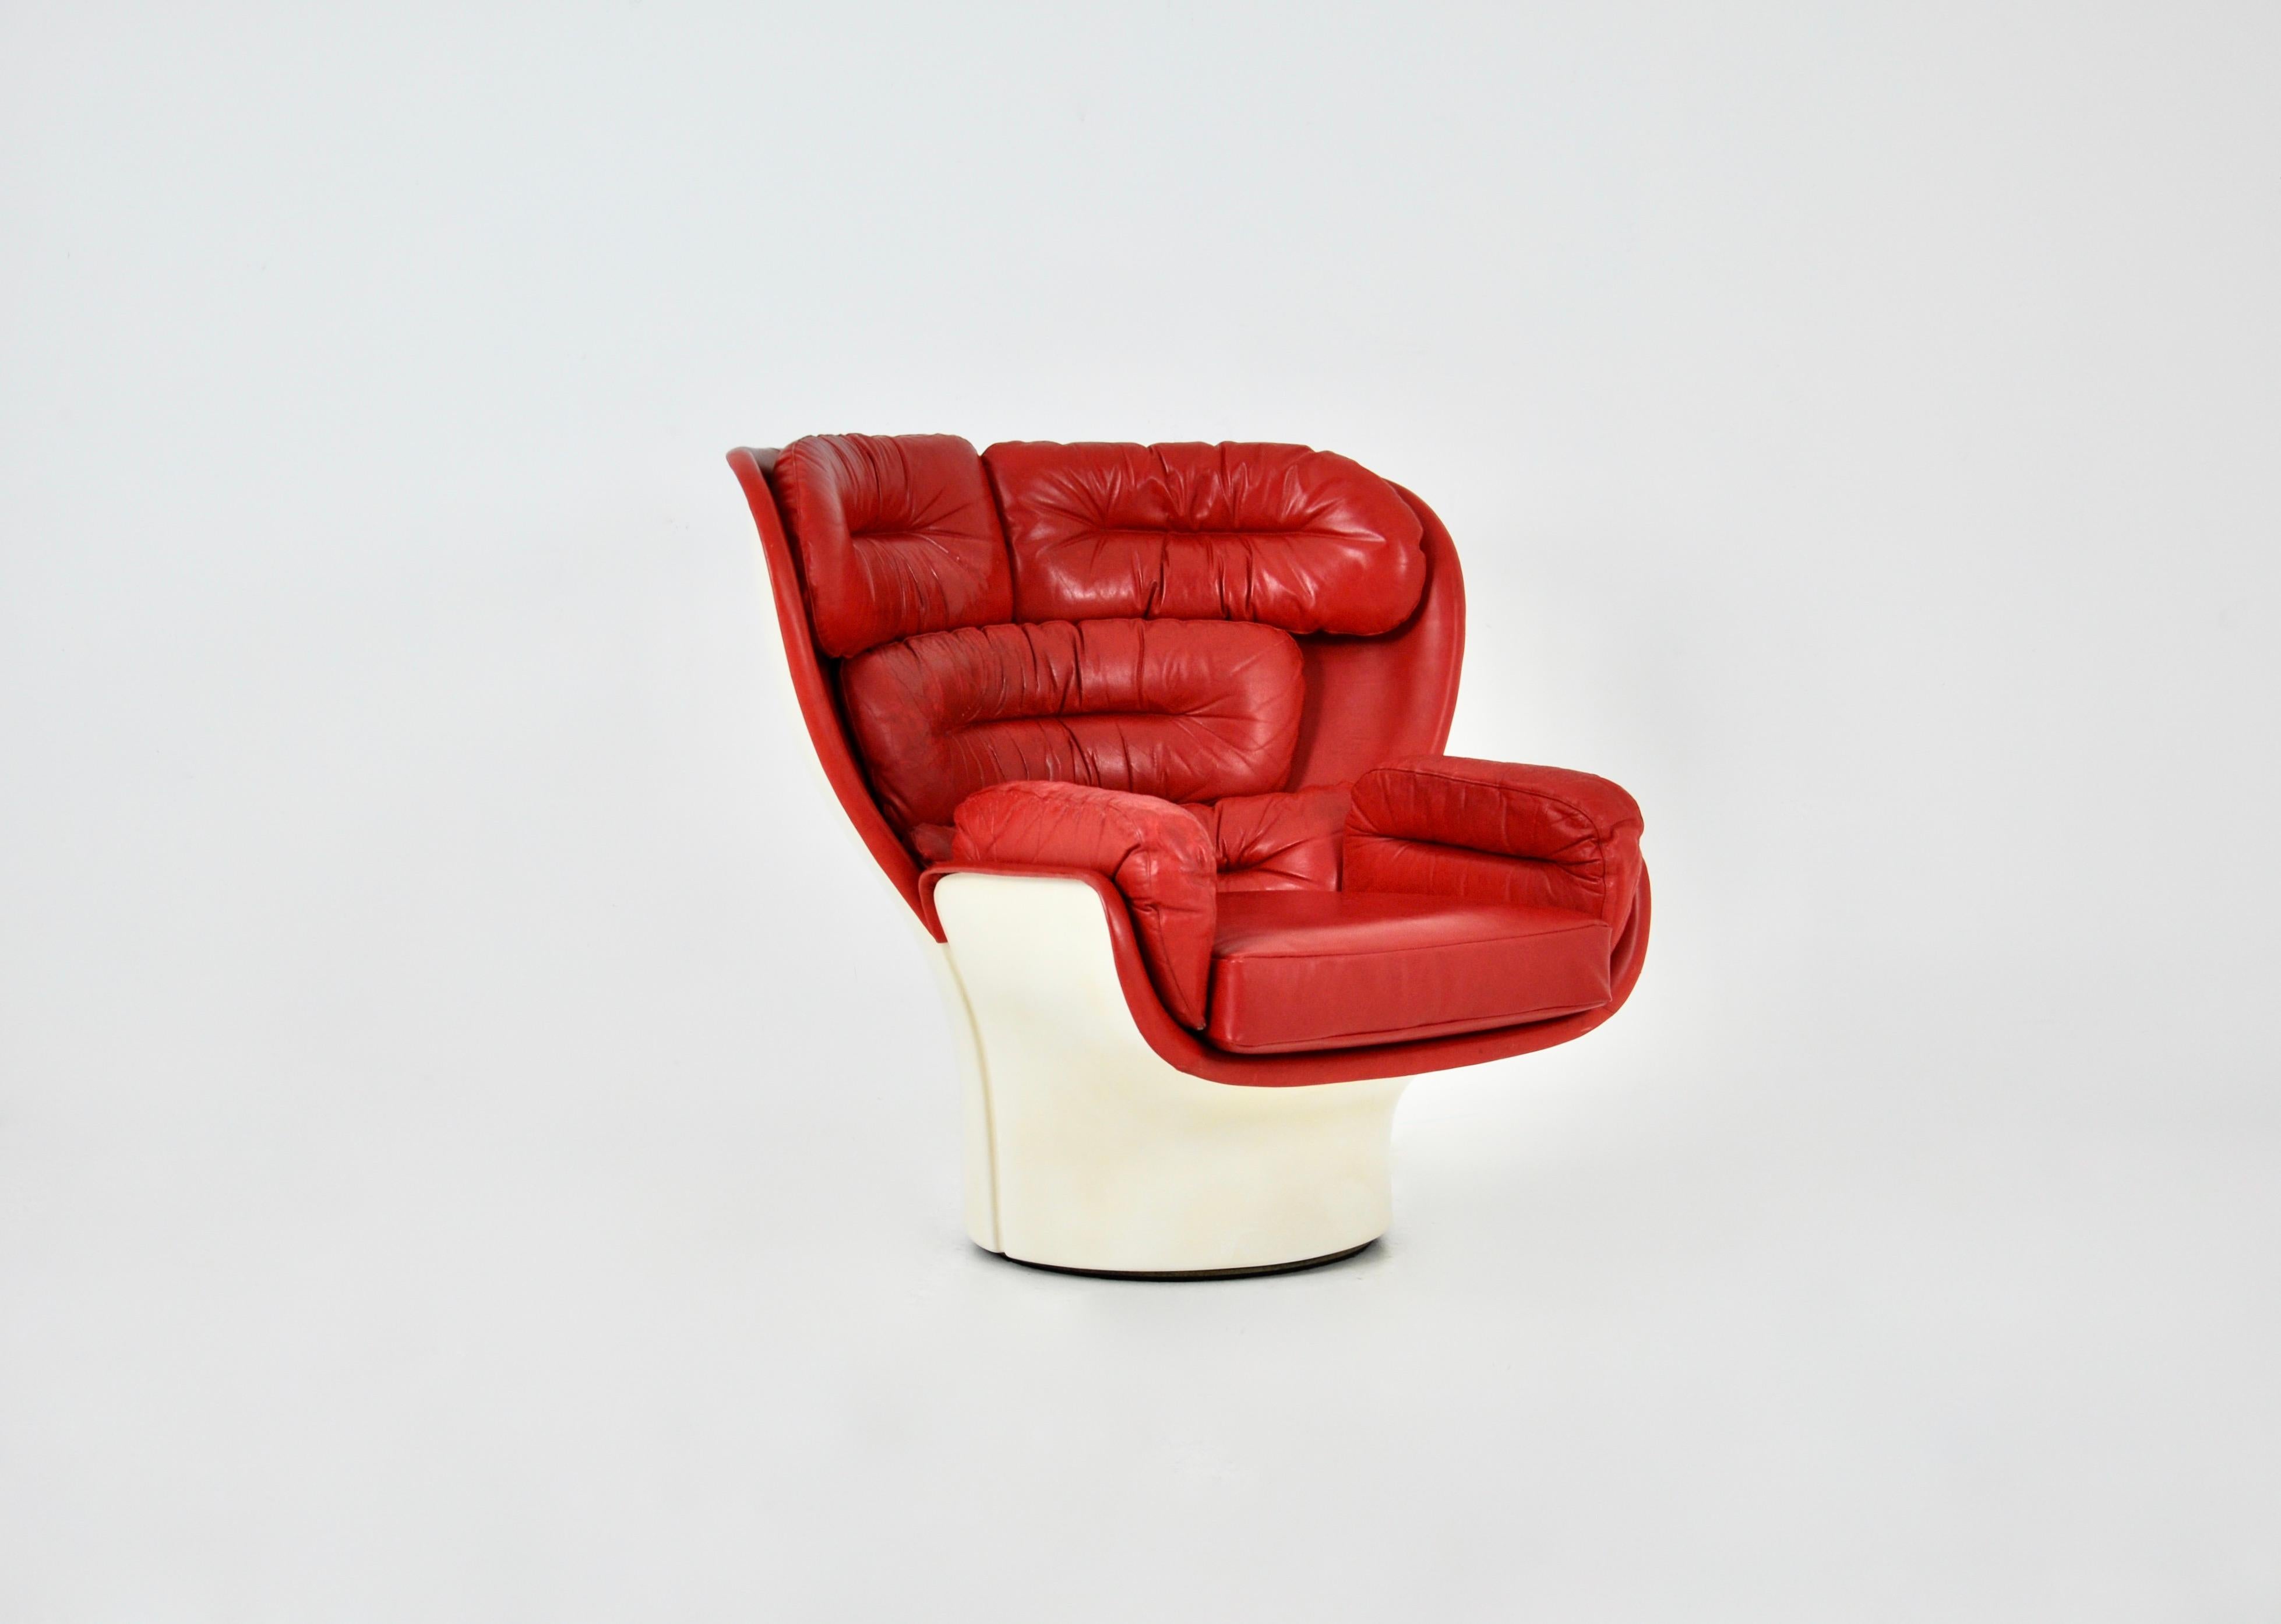 Swivel armchair in red leather and white shell. Seat height 40cm. Wear due to time and age.